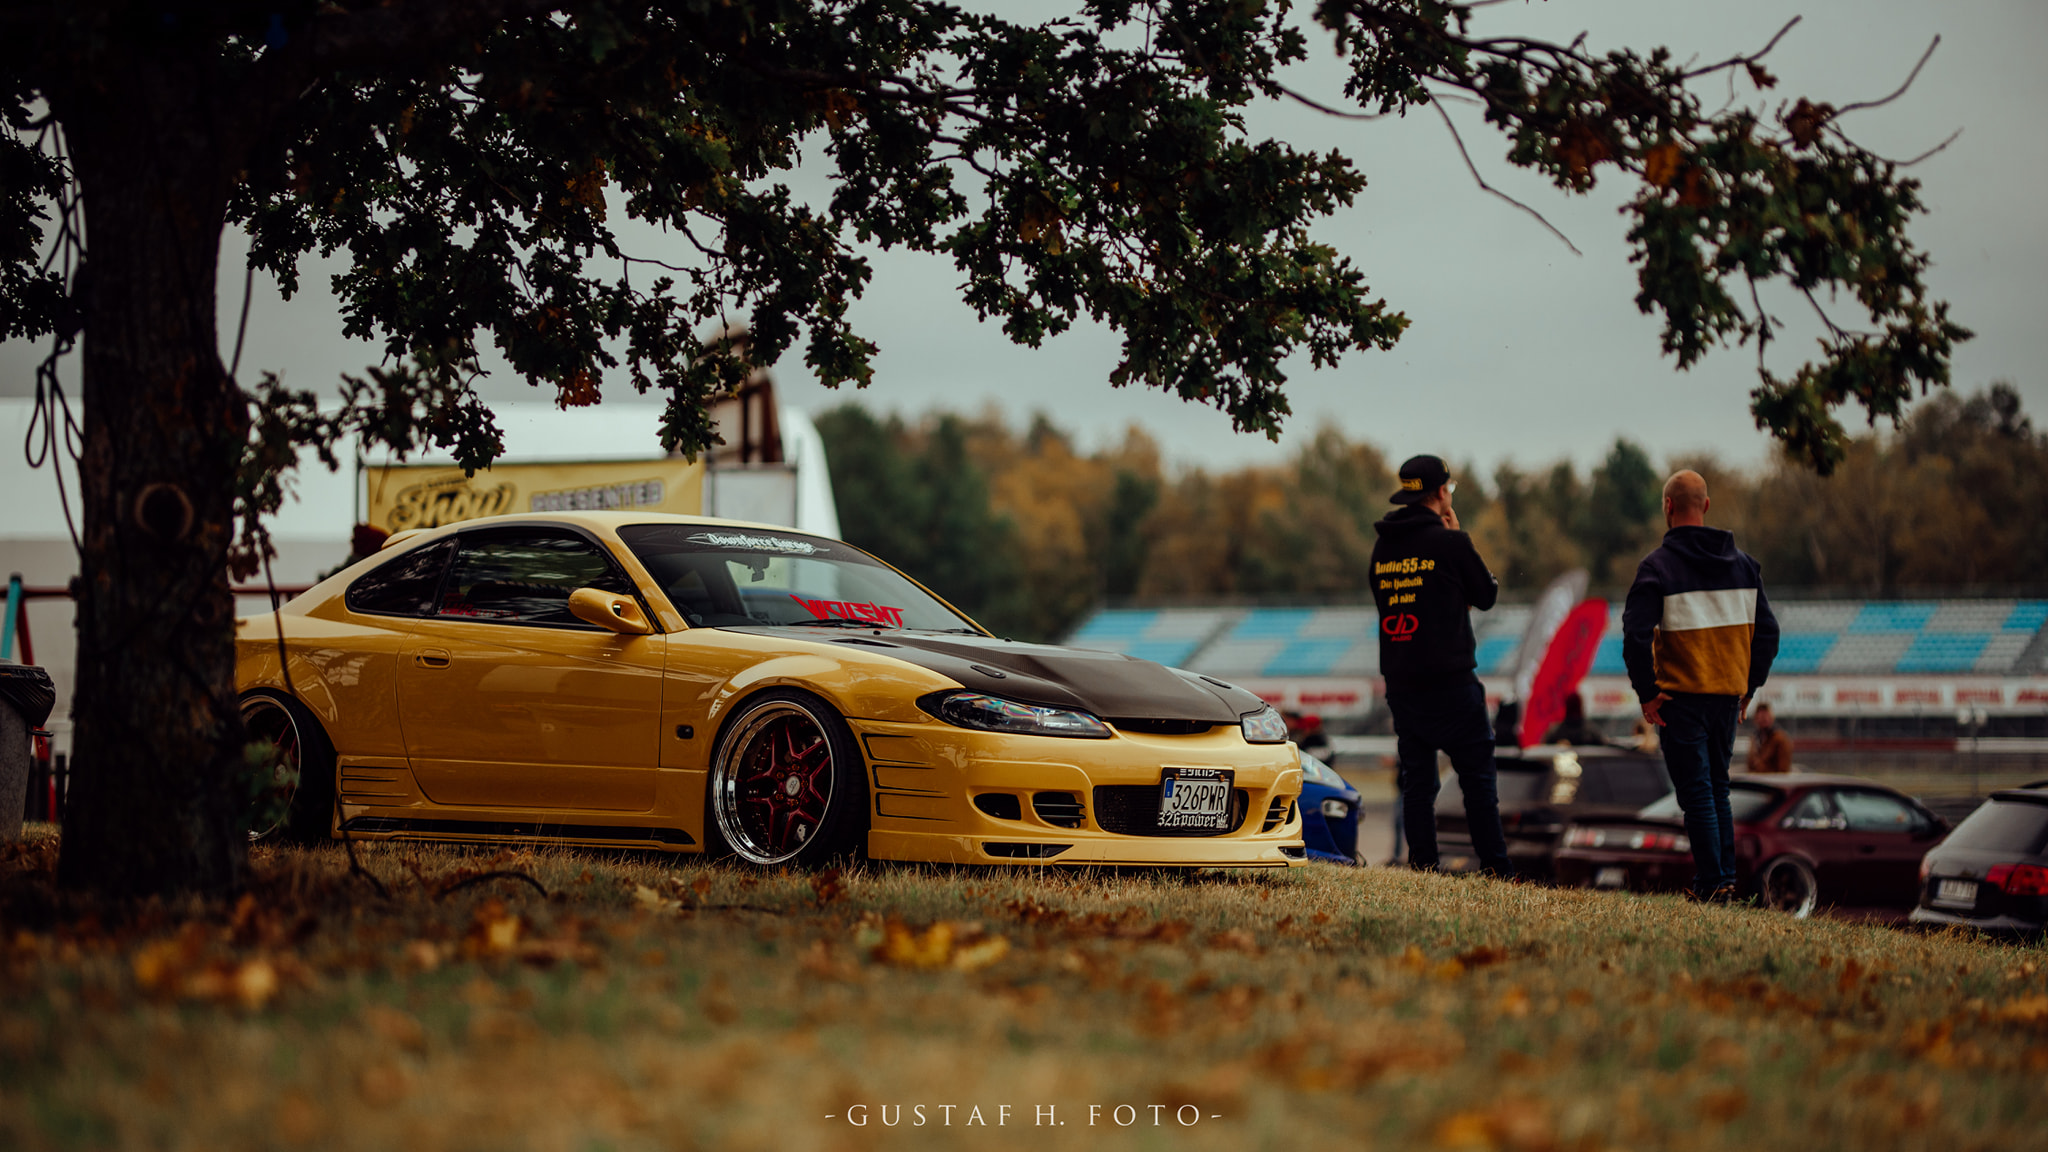 General 2048x1152 Gustaf H car Nissan Nissan Silvia S15 Sweden yellow licence plates trees grass leaves